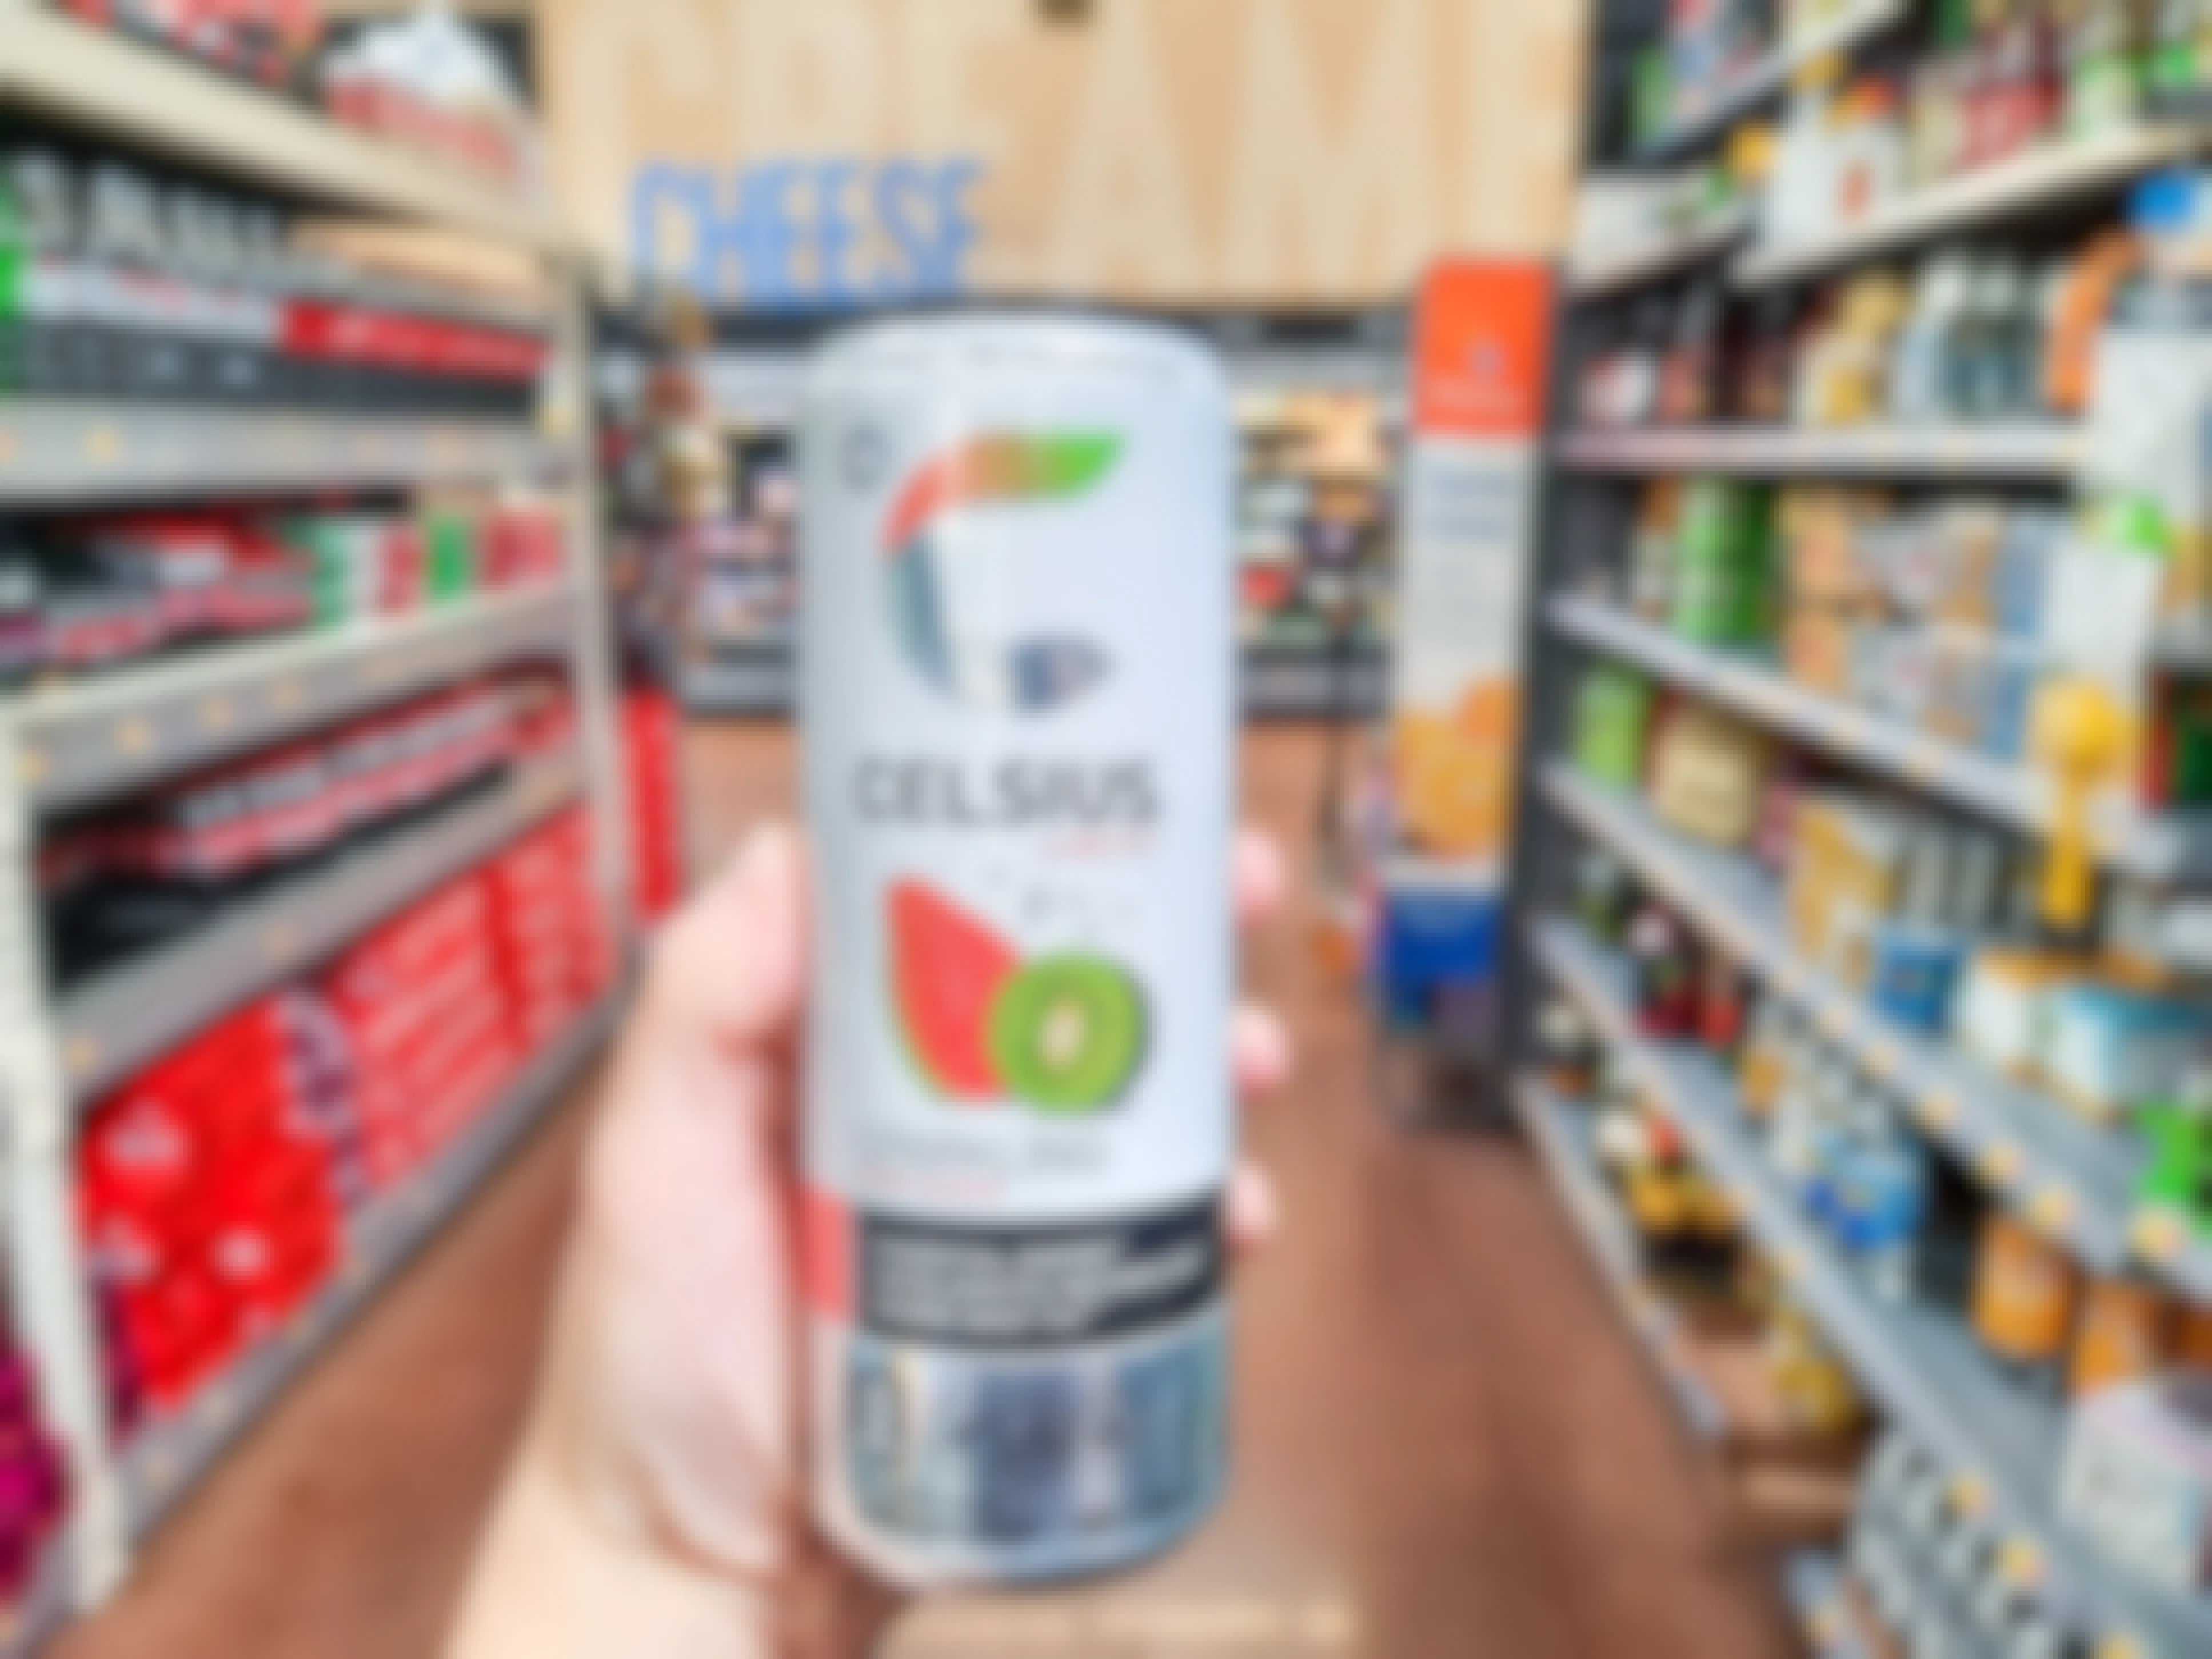 Get Up to $250 in the Celsius Beverage Settlement